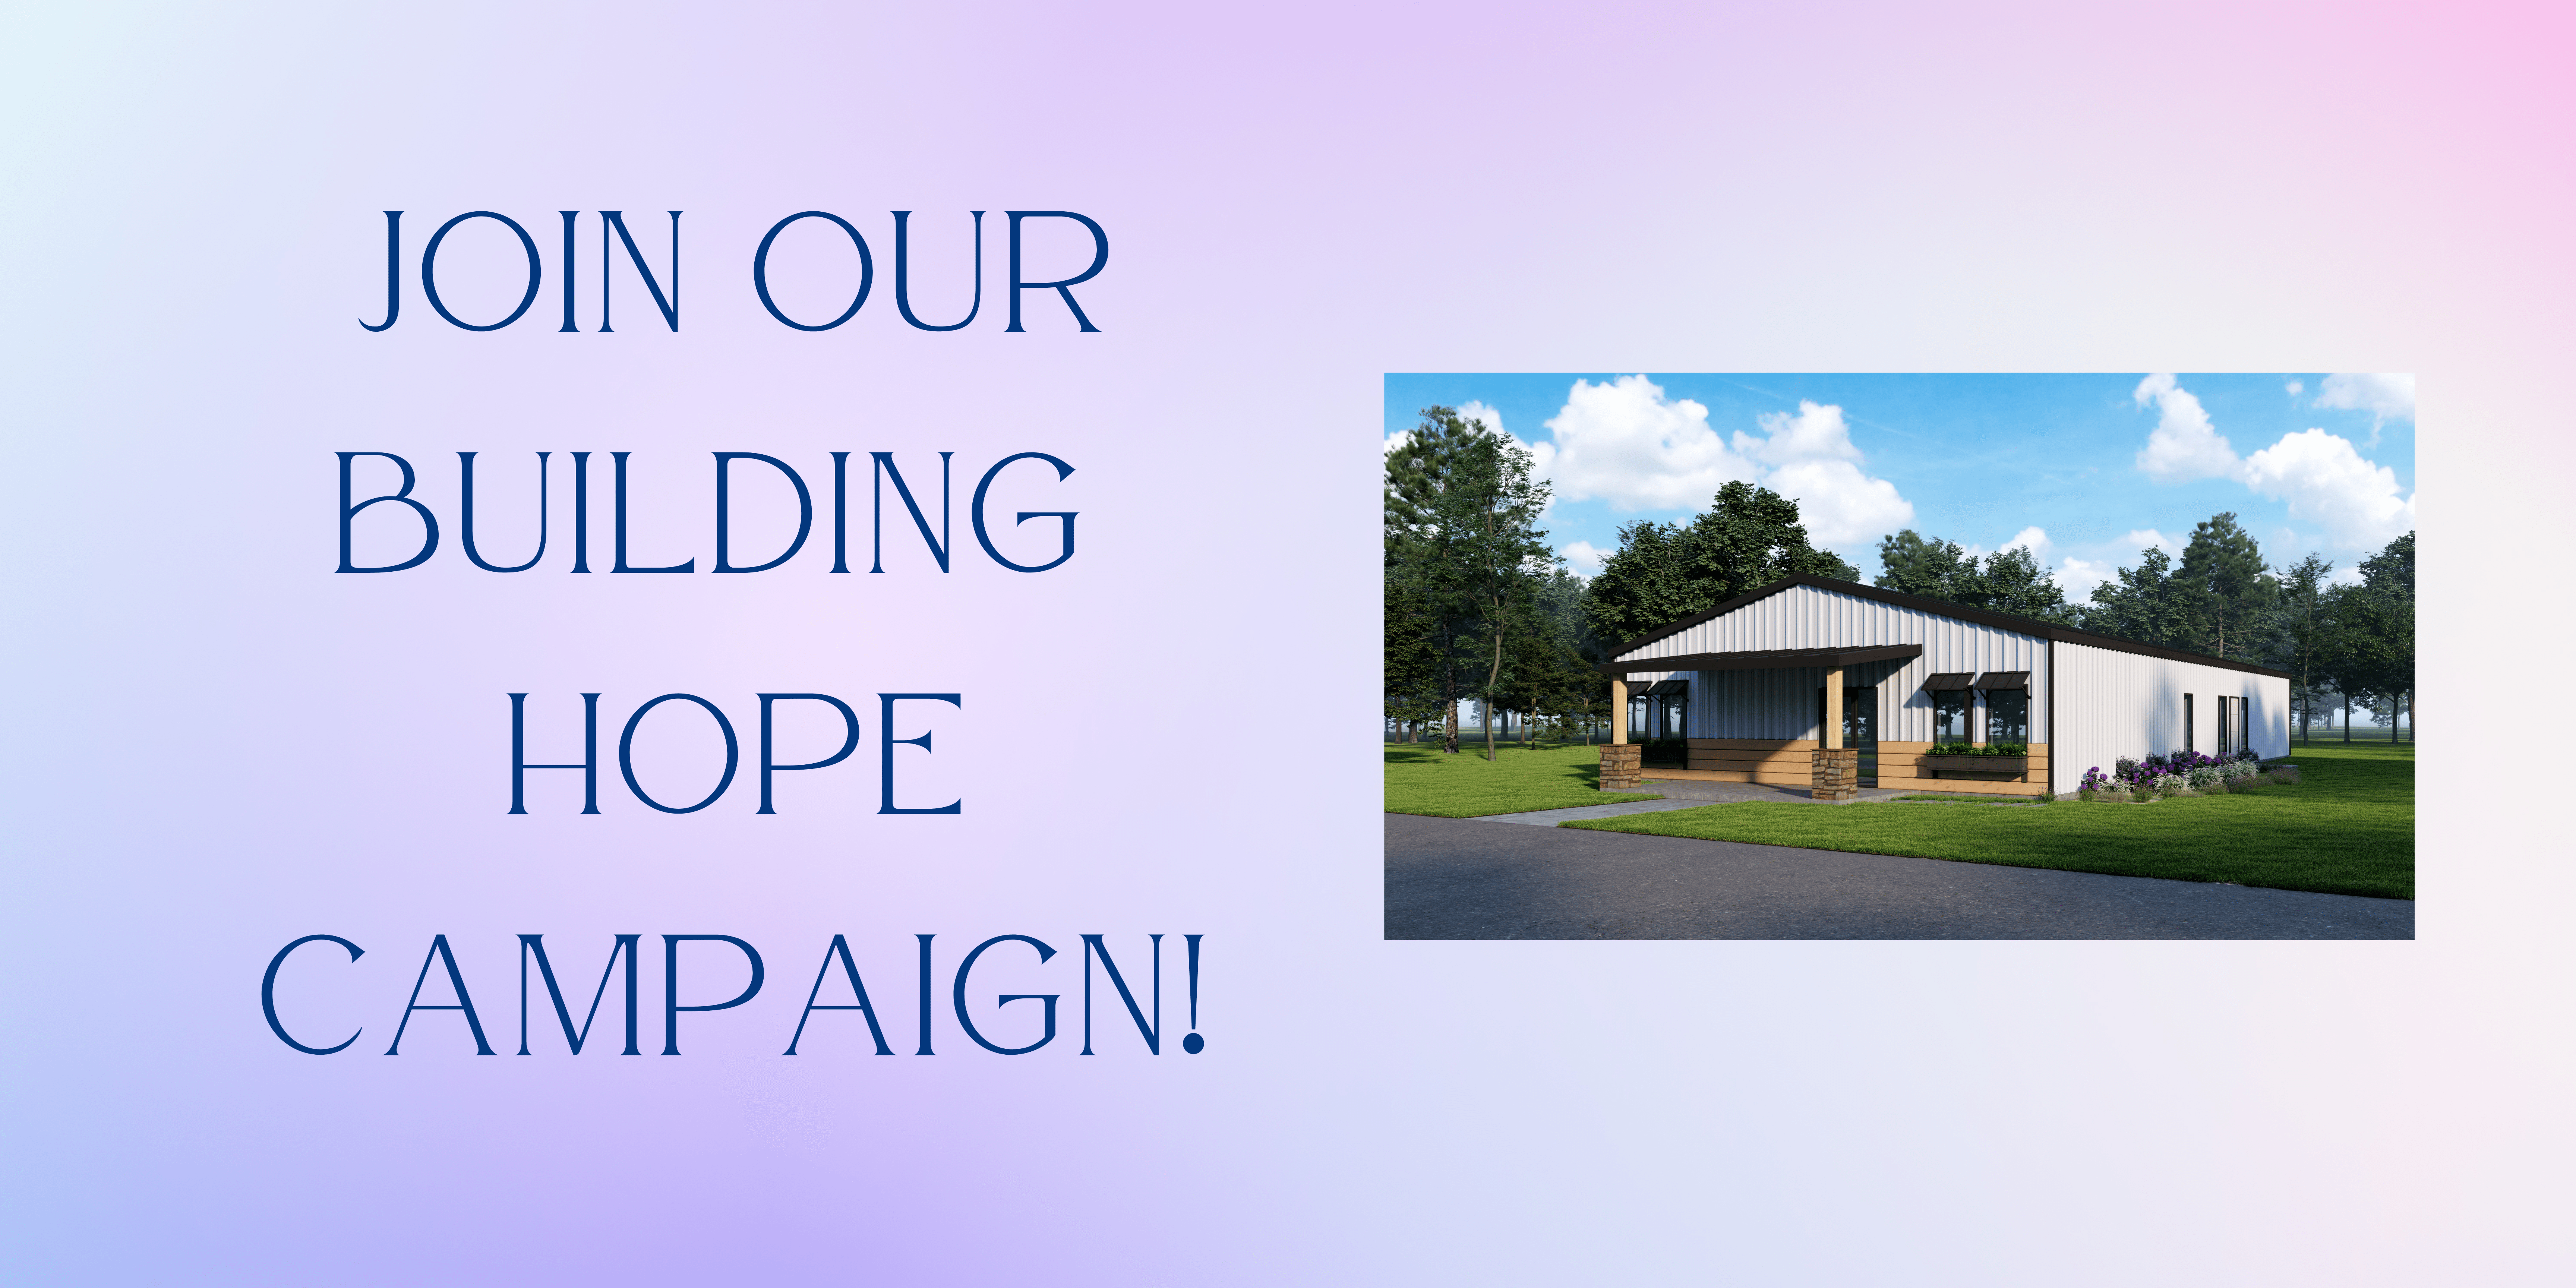 Join our Building Hope Campaign - Donate Today!